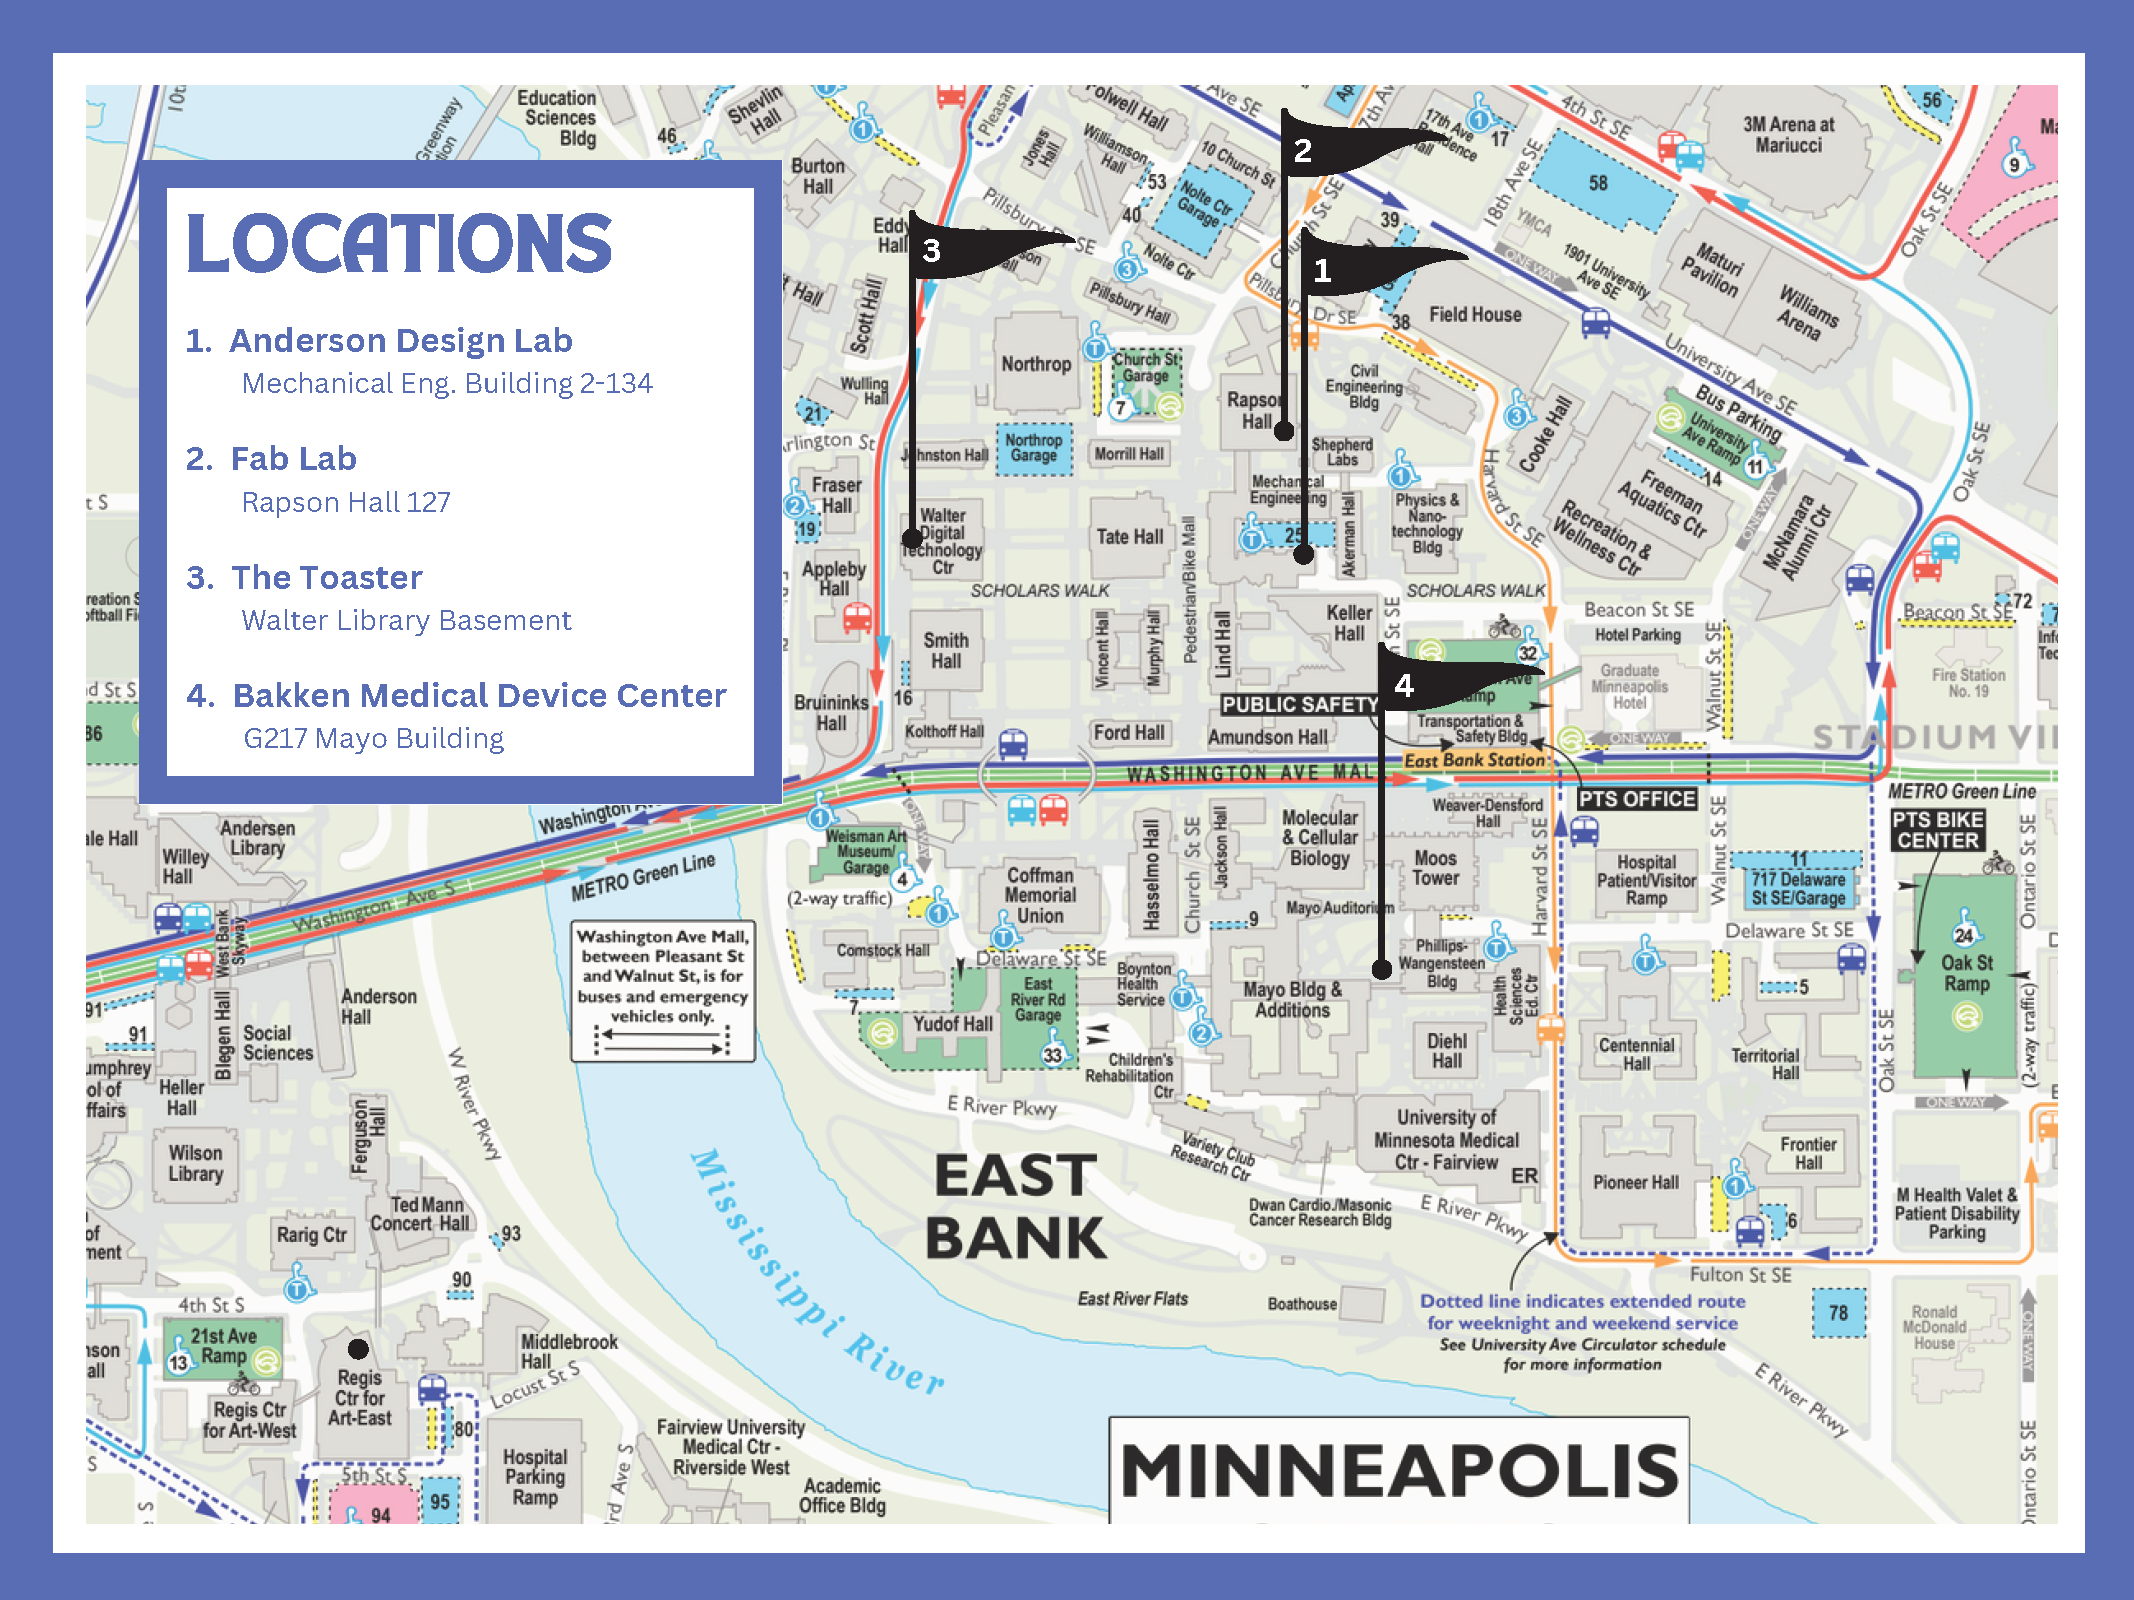 Map of the UMN East Bank with mini golf locations marked.